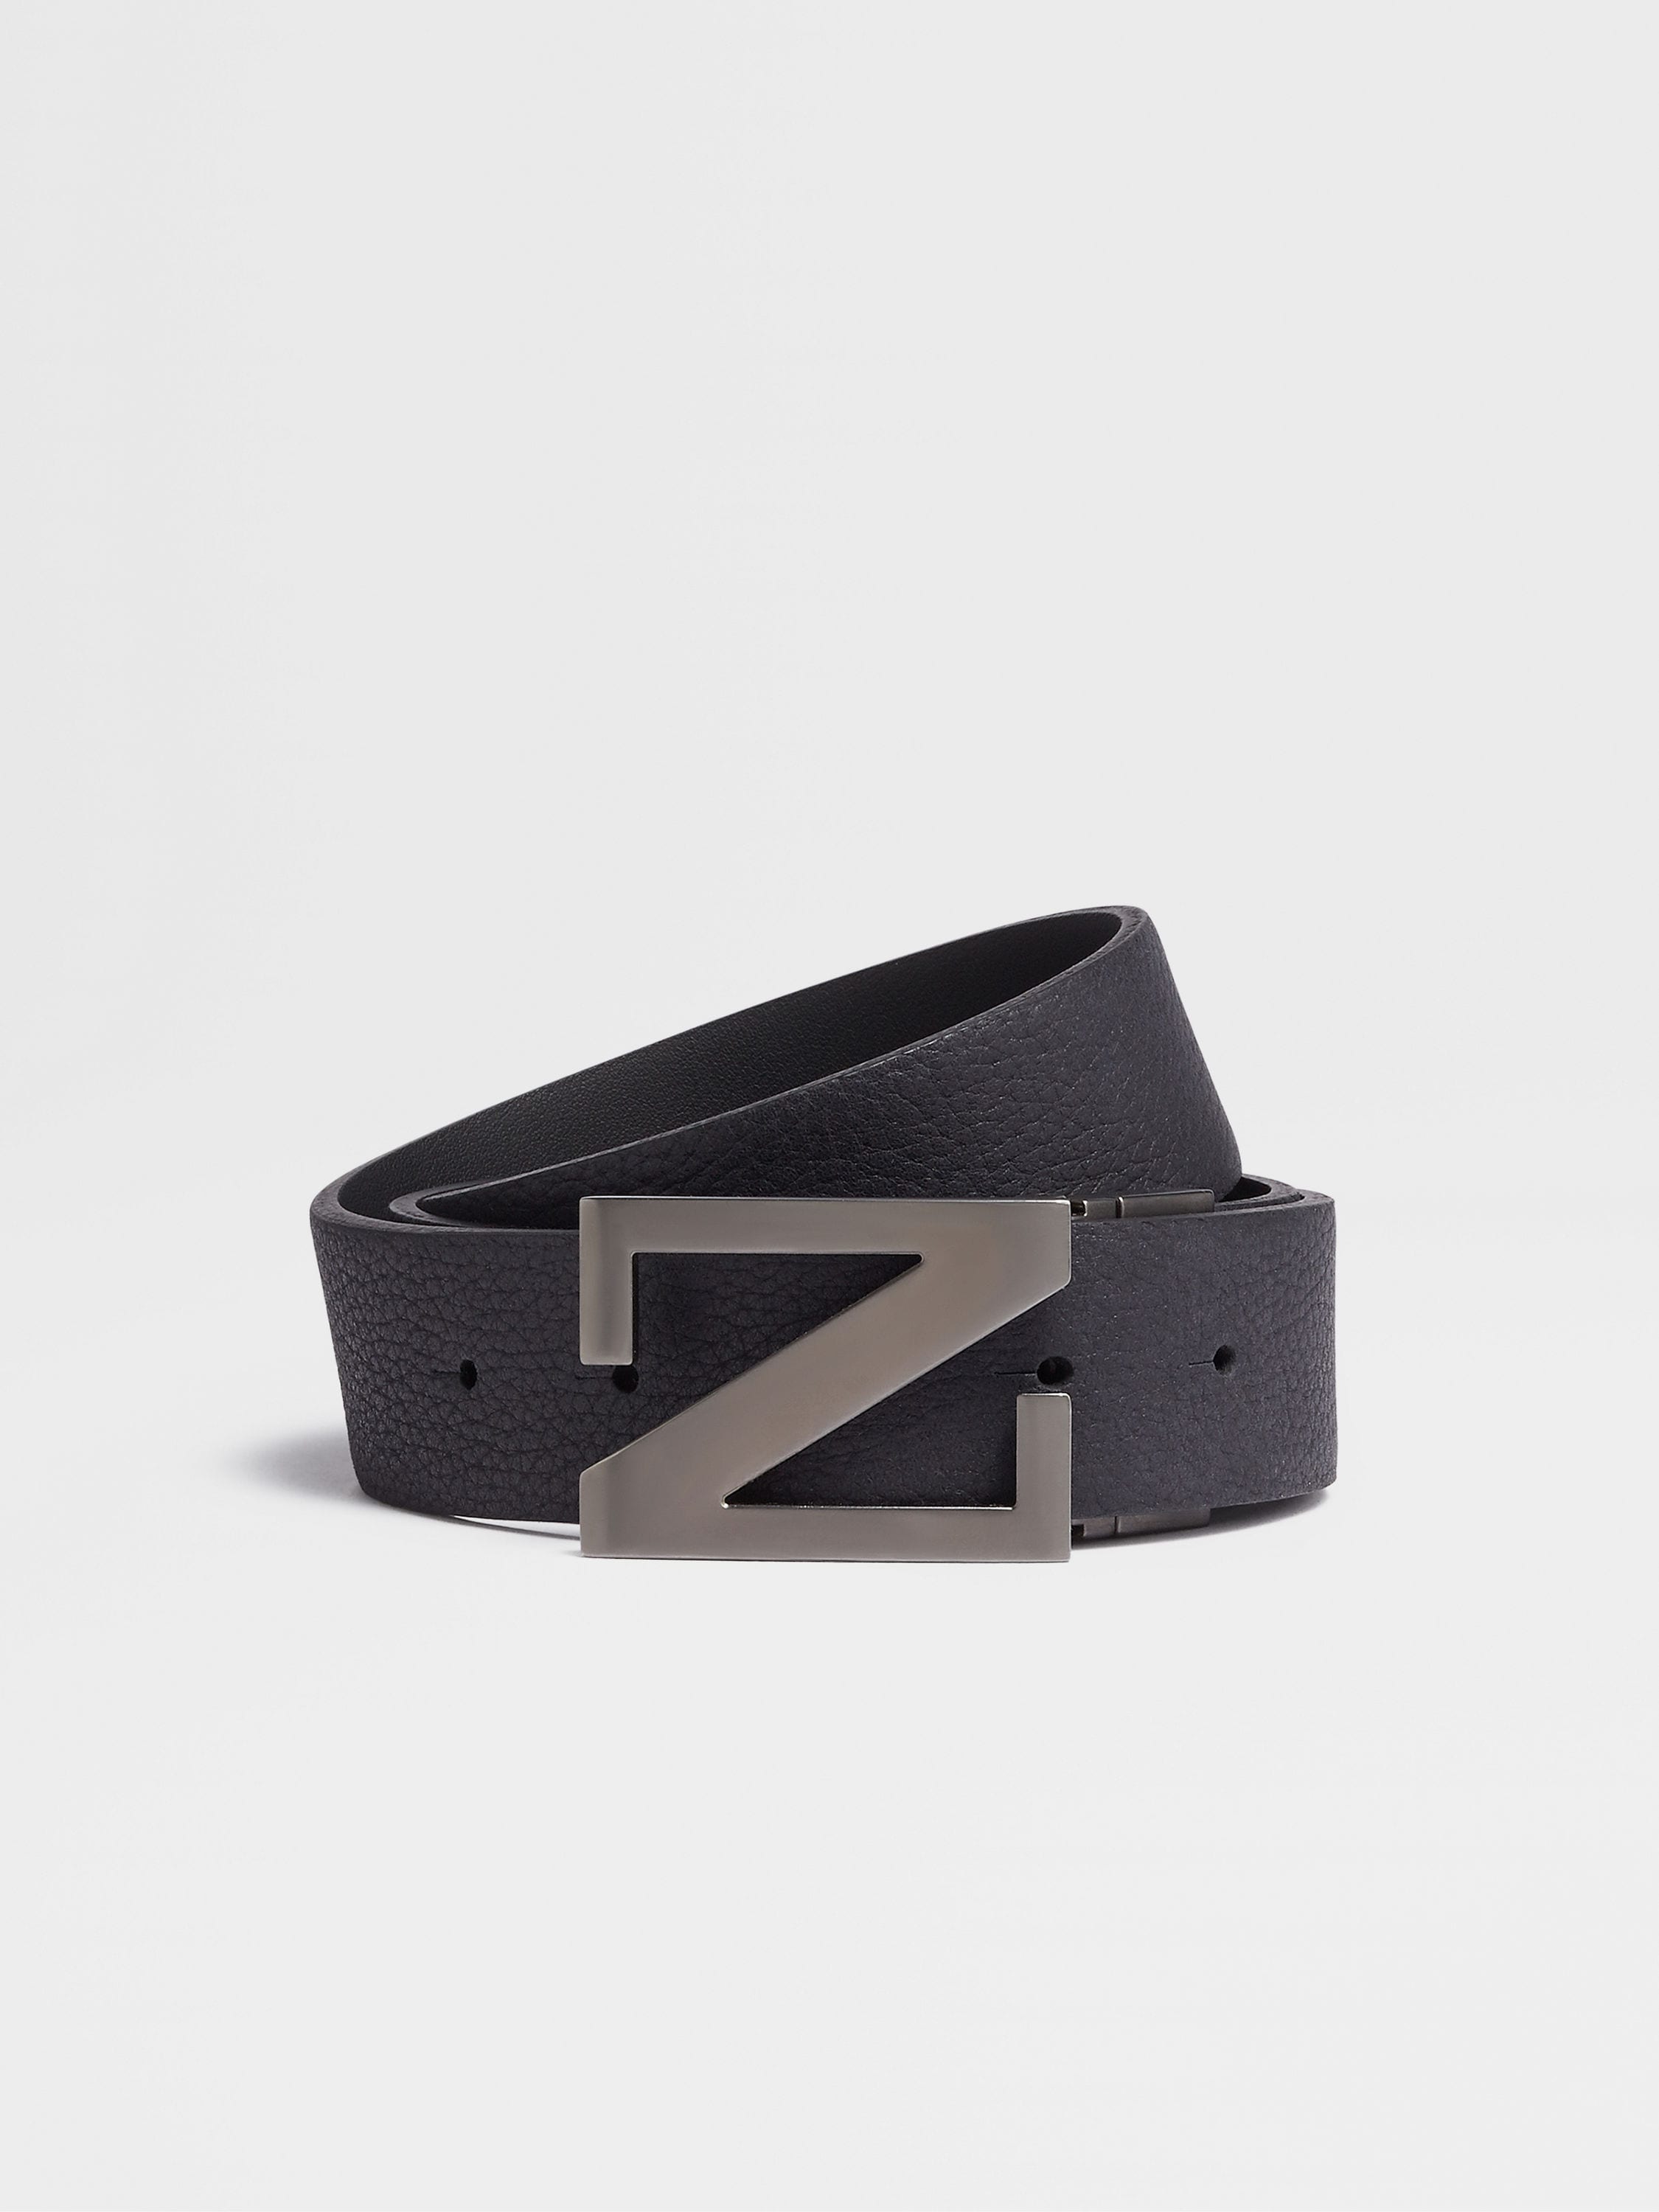 Navy Blue and Black Reversible Leather Belt